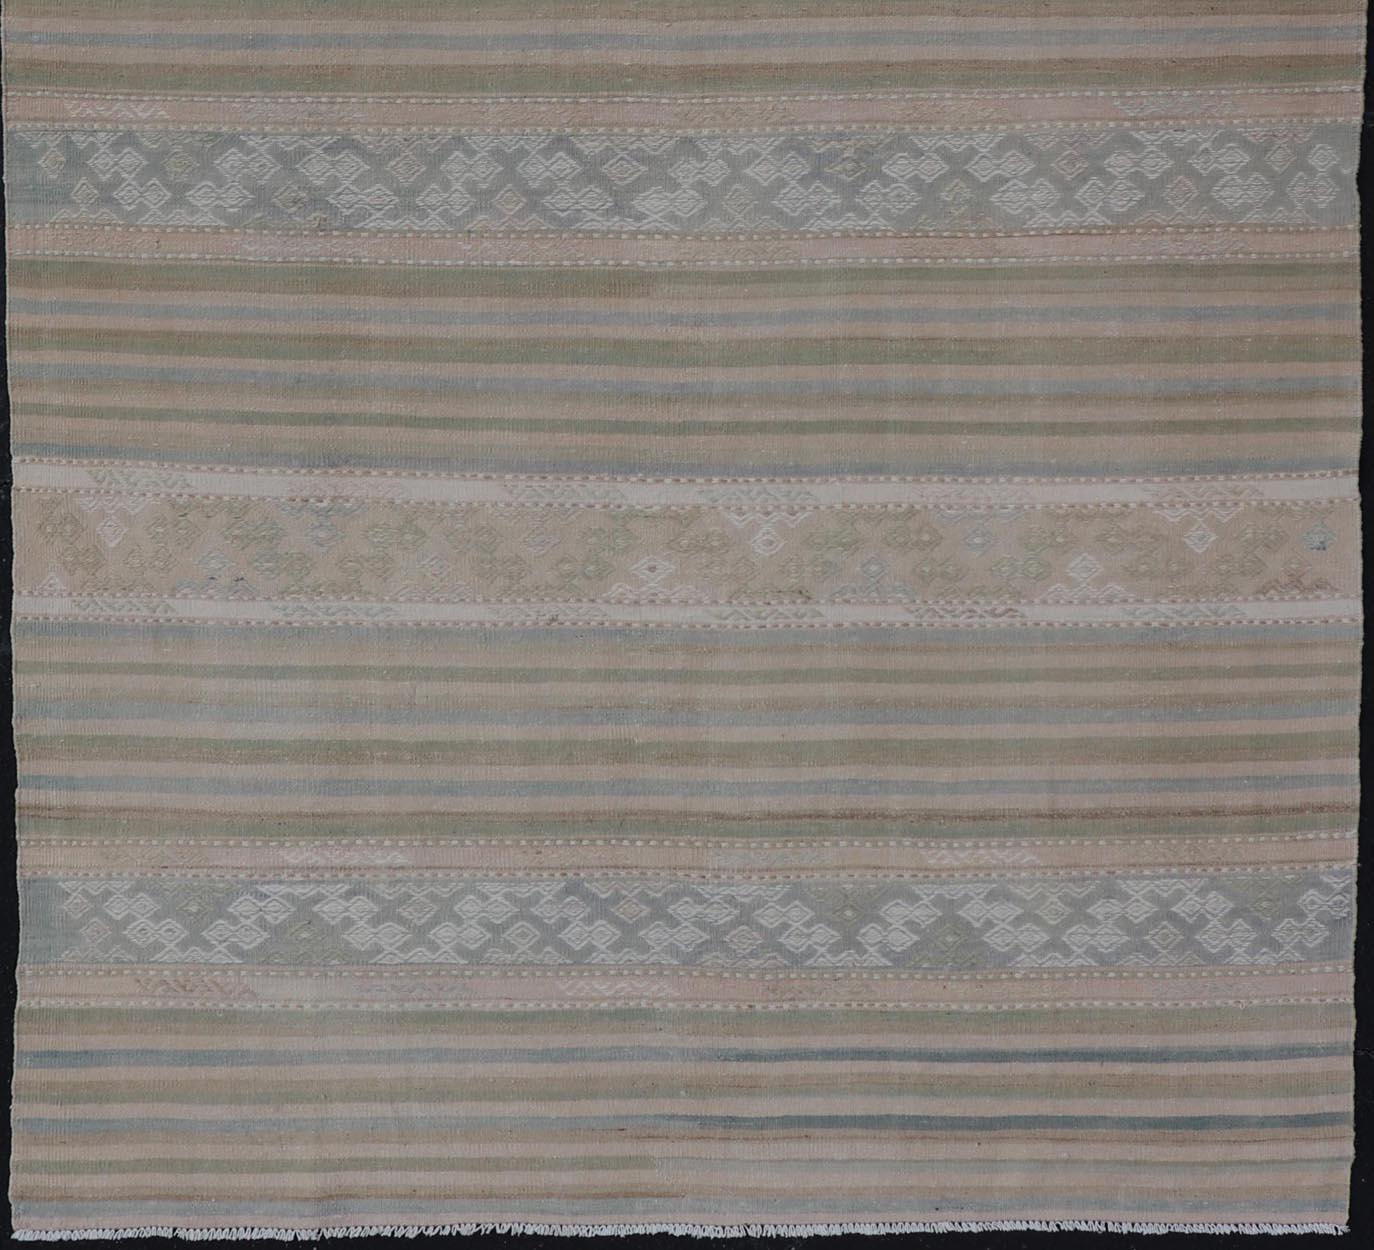 Measures: 5'2 x 10'1.

This charming vintage flat weave Kilim was hand woven in Turkey during the 1950s. Varying color combinations of muted shades of blue, pink, cream, green, as well as neutral shades like tans. Overall, this piece has held it's